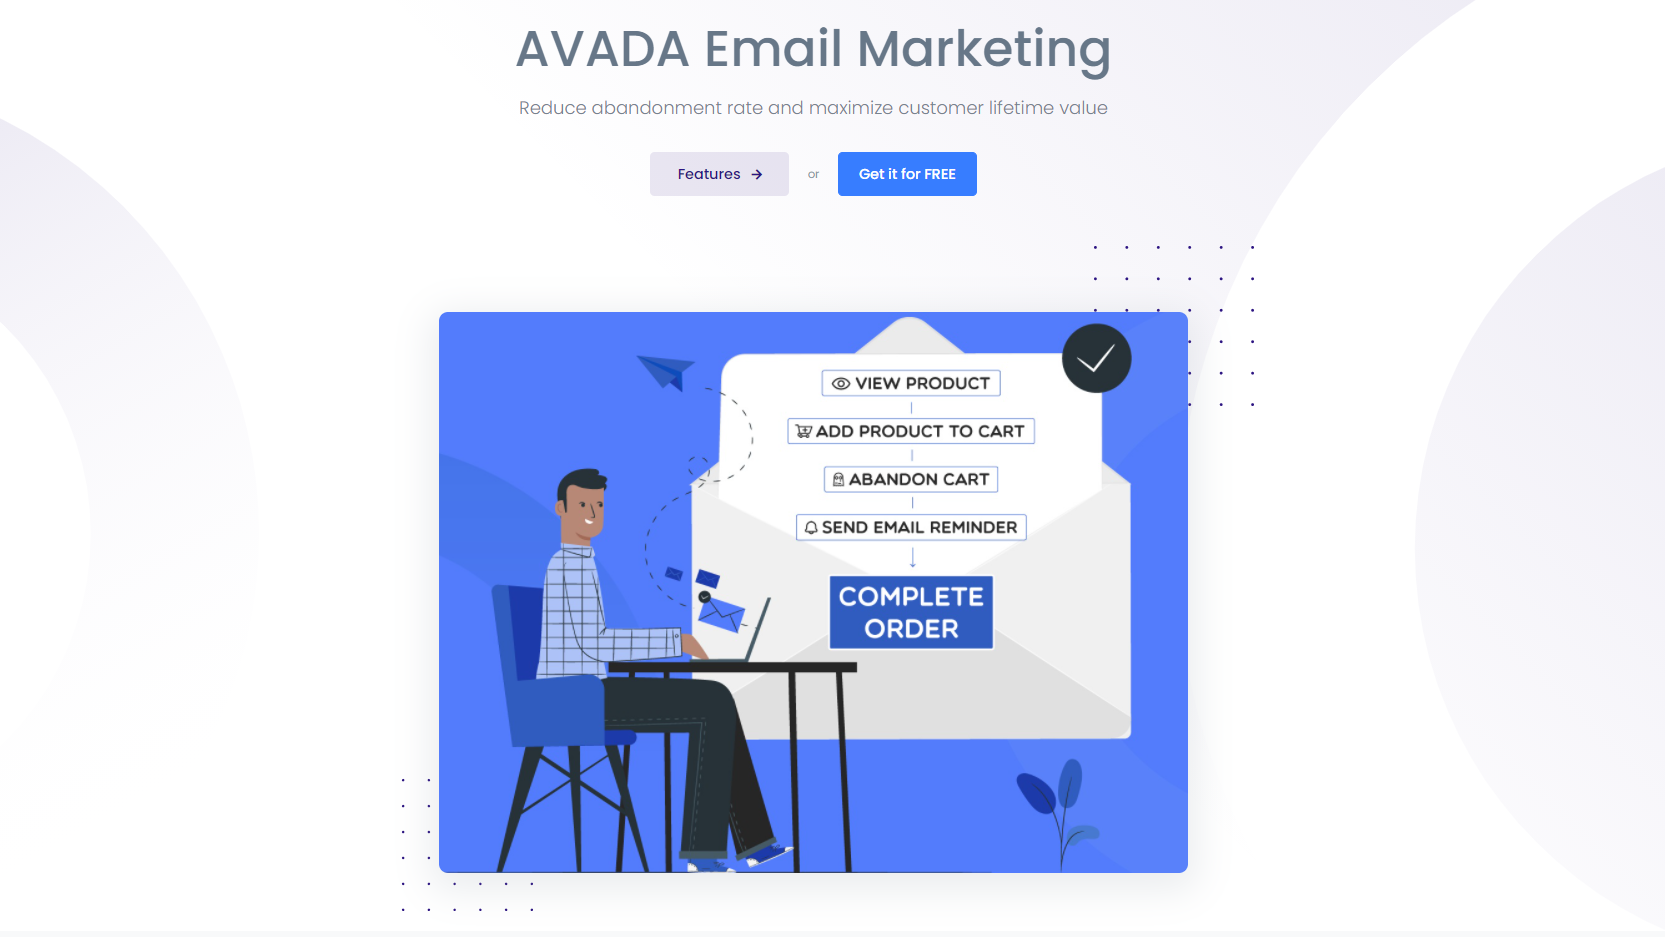 6. AVADA email marketing solution.png